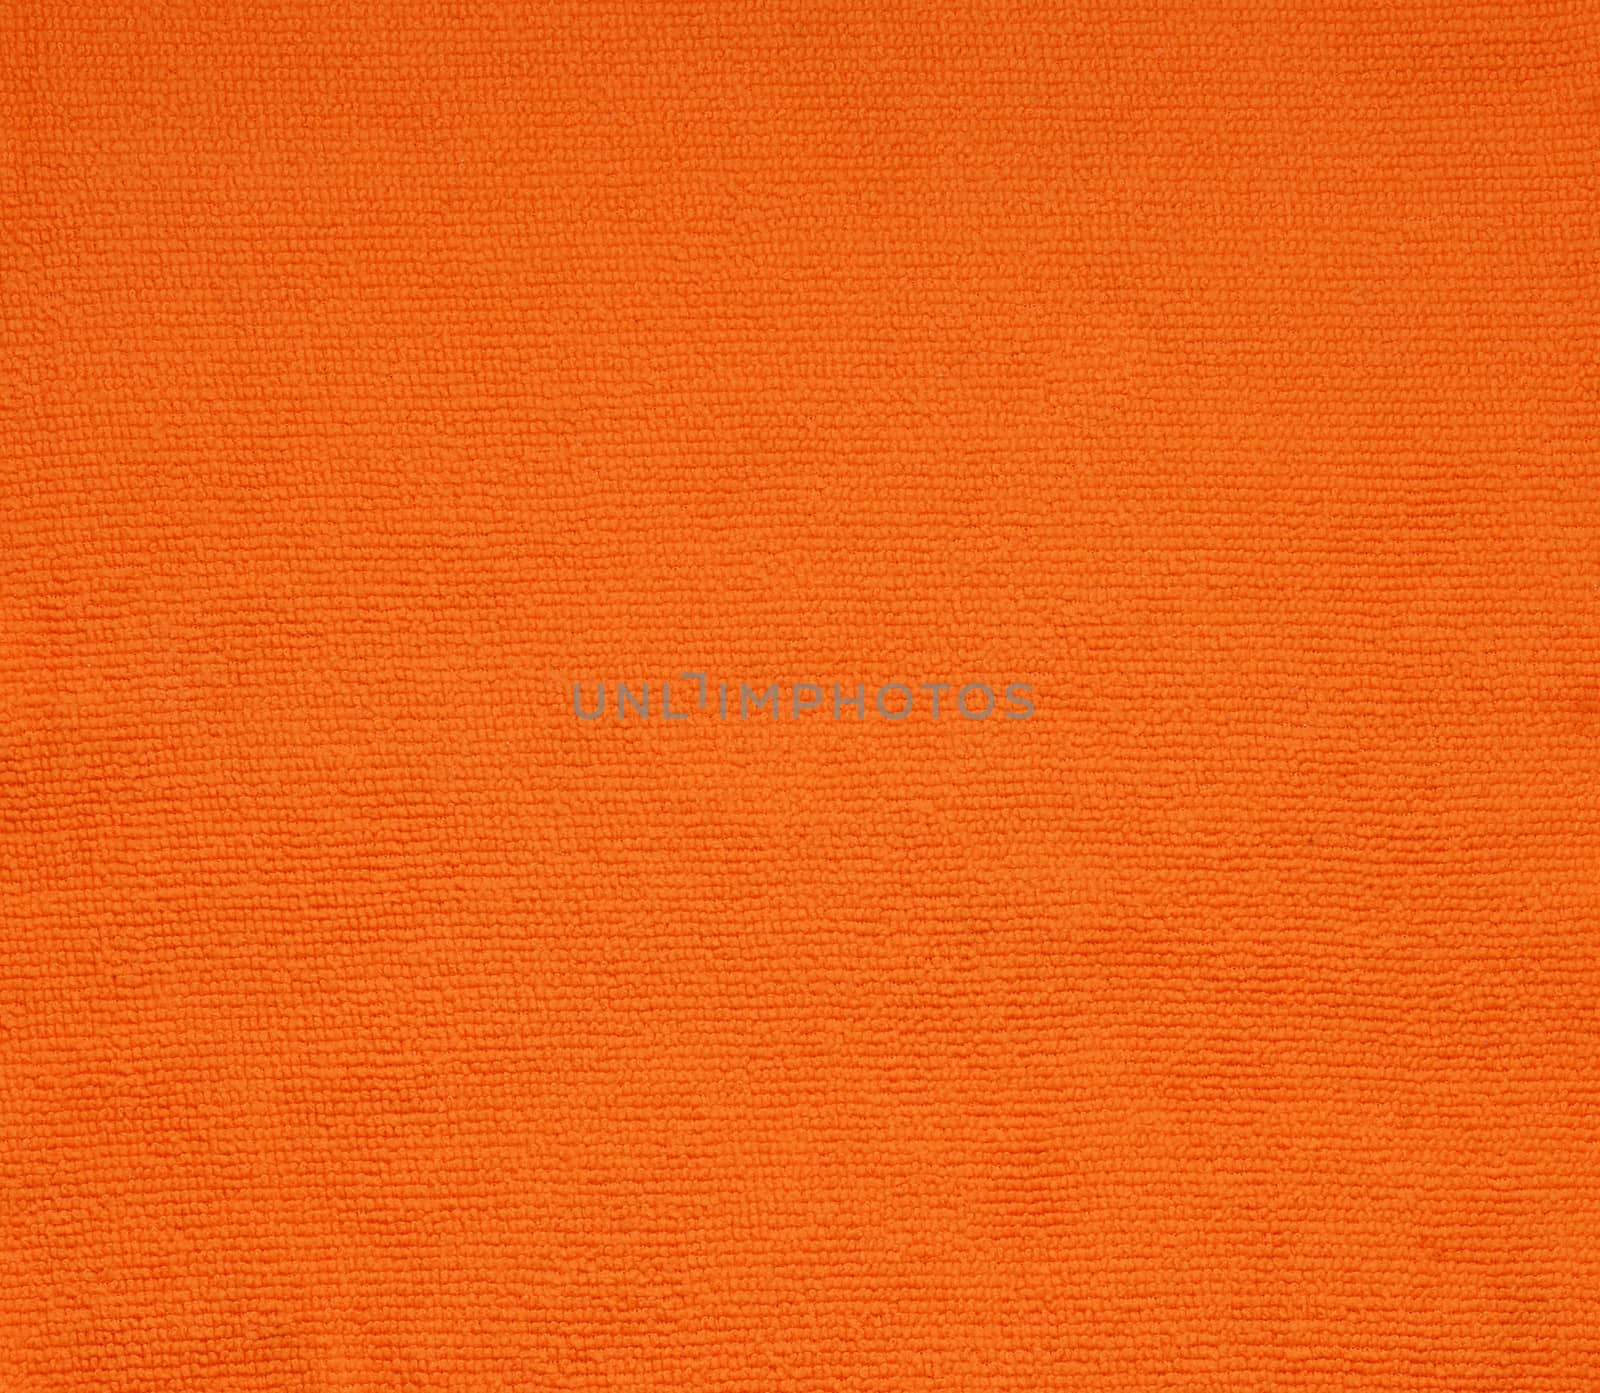 surface orange fabric for background by phochi